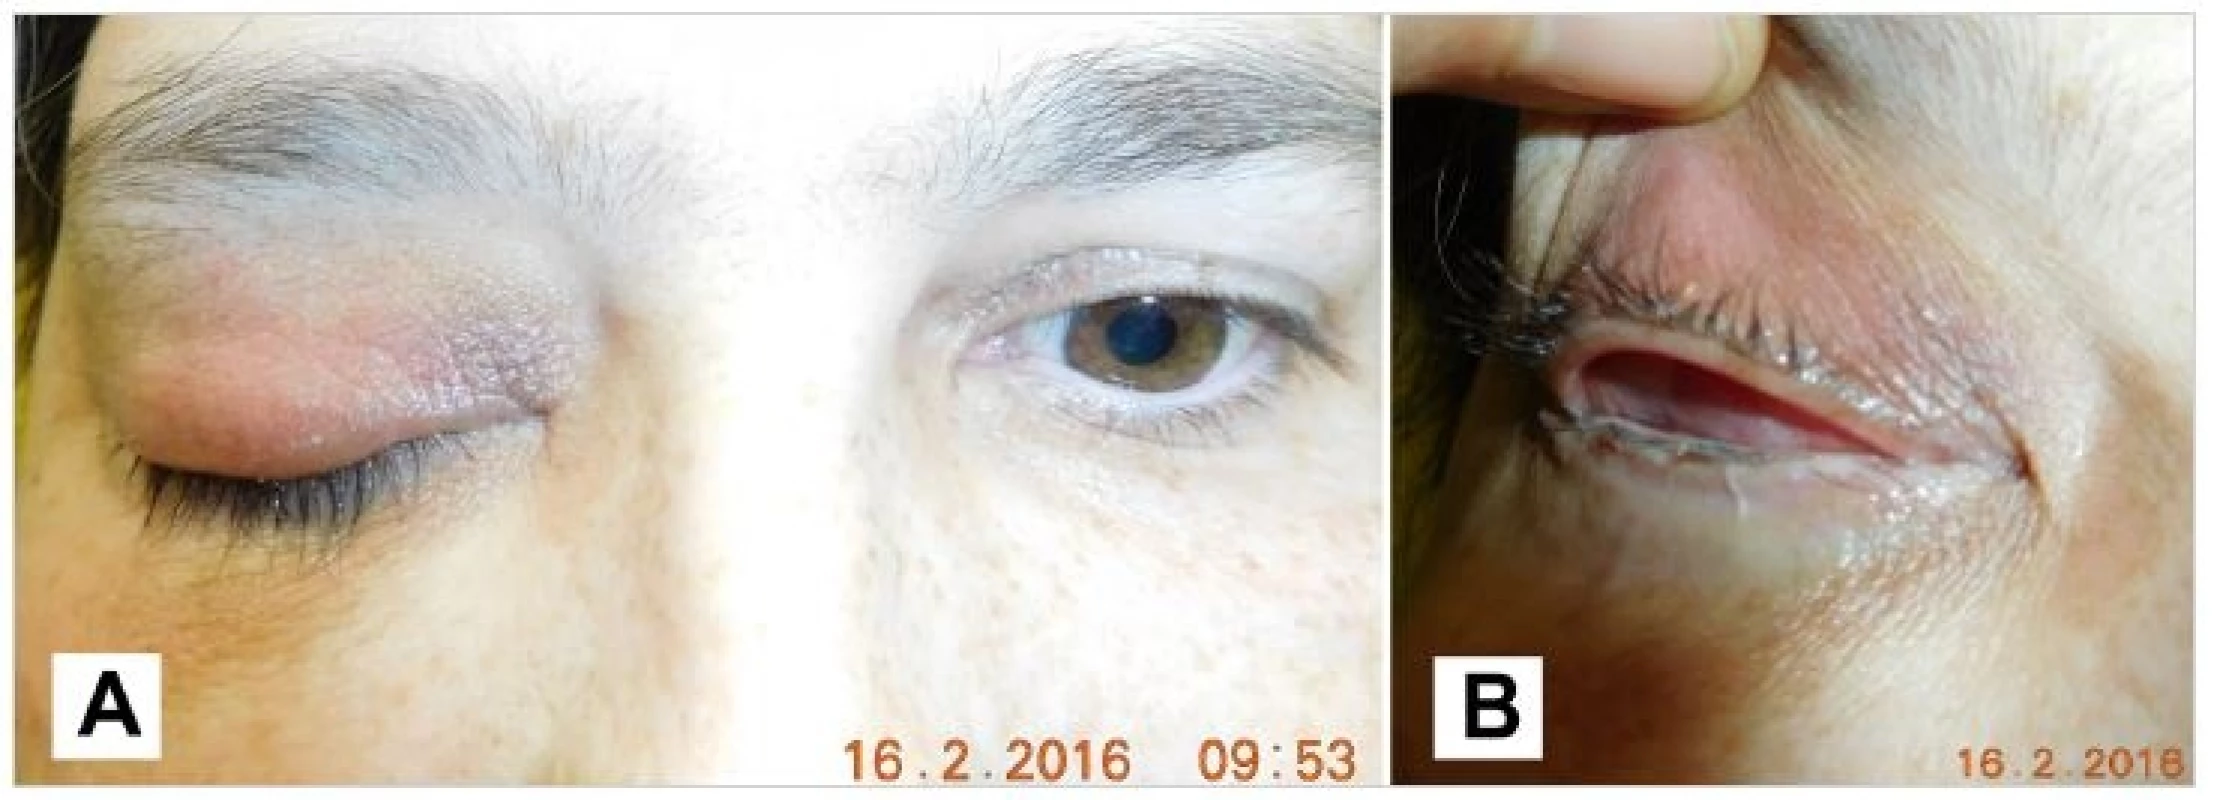 Patient after the surgery 2/2016, pseudoptosis (A), detail of the conjunctival sac (B)